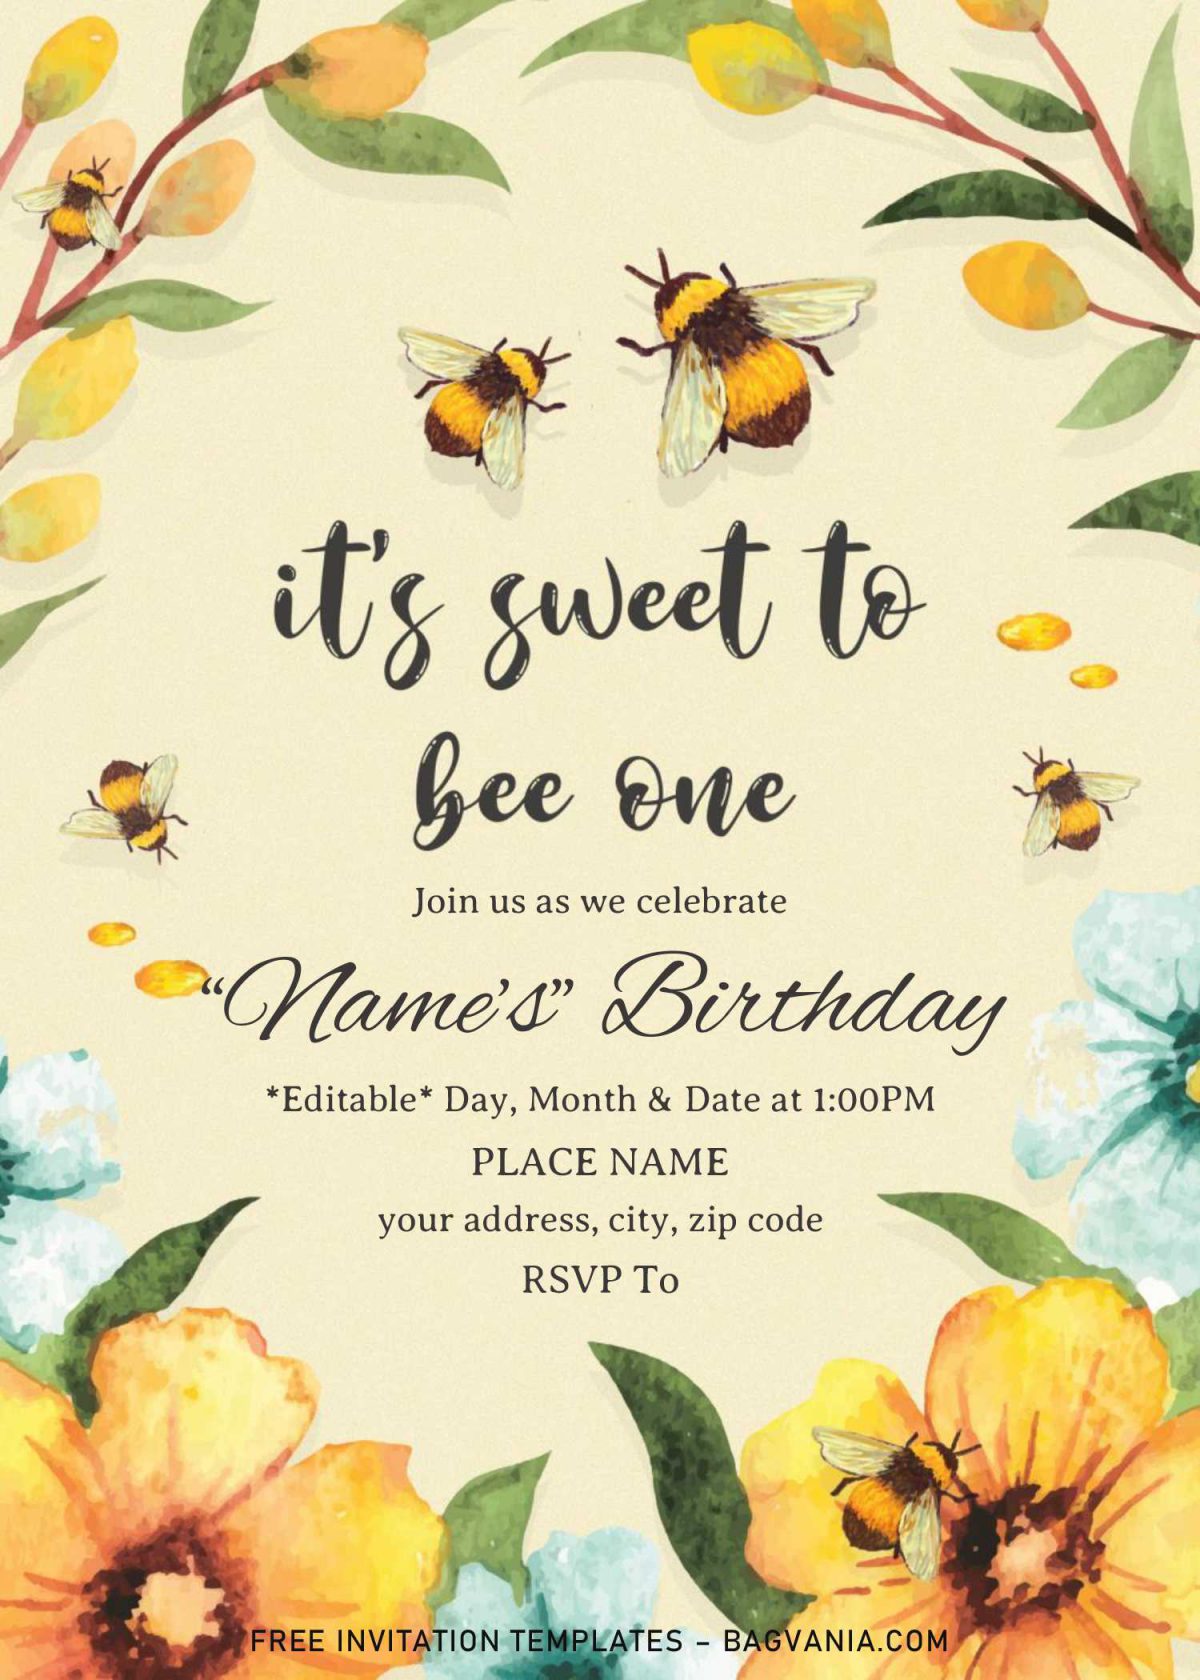 First Bee Day Birthday Invitation Templates - Editable .Docx and has Watercolor bees illustrations